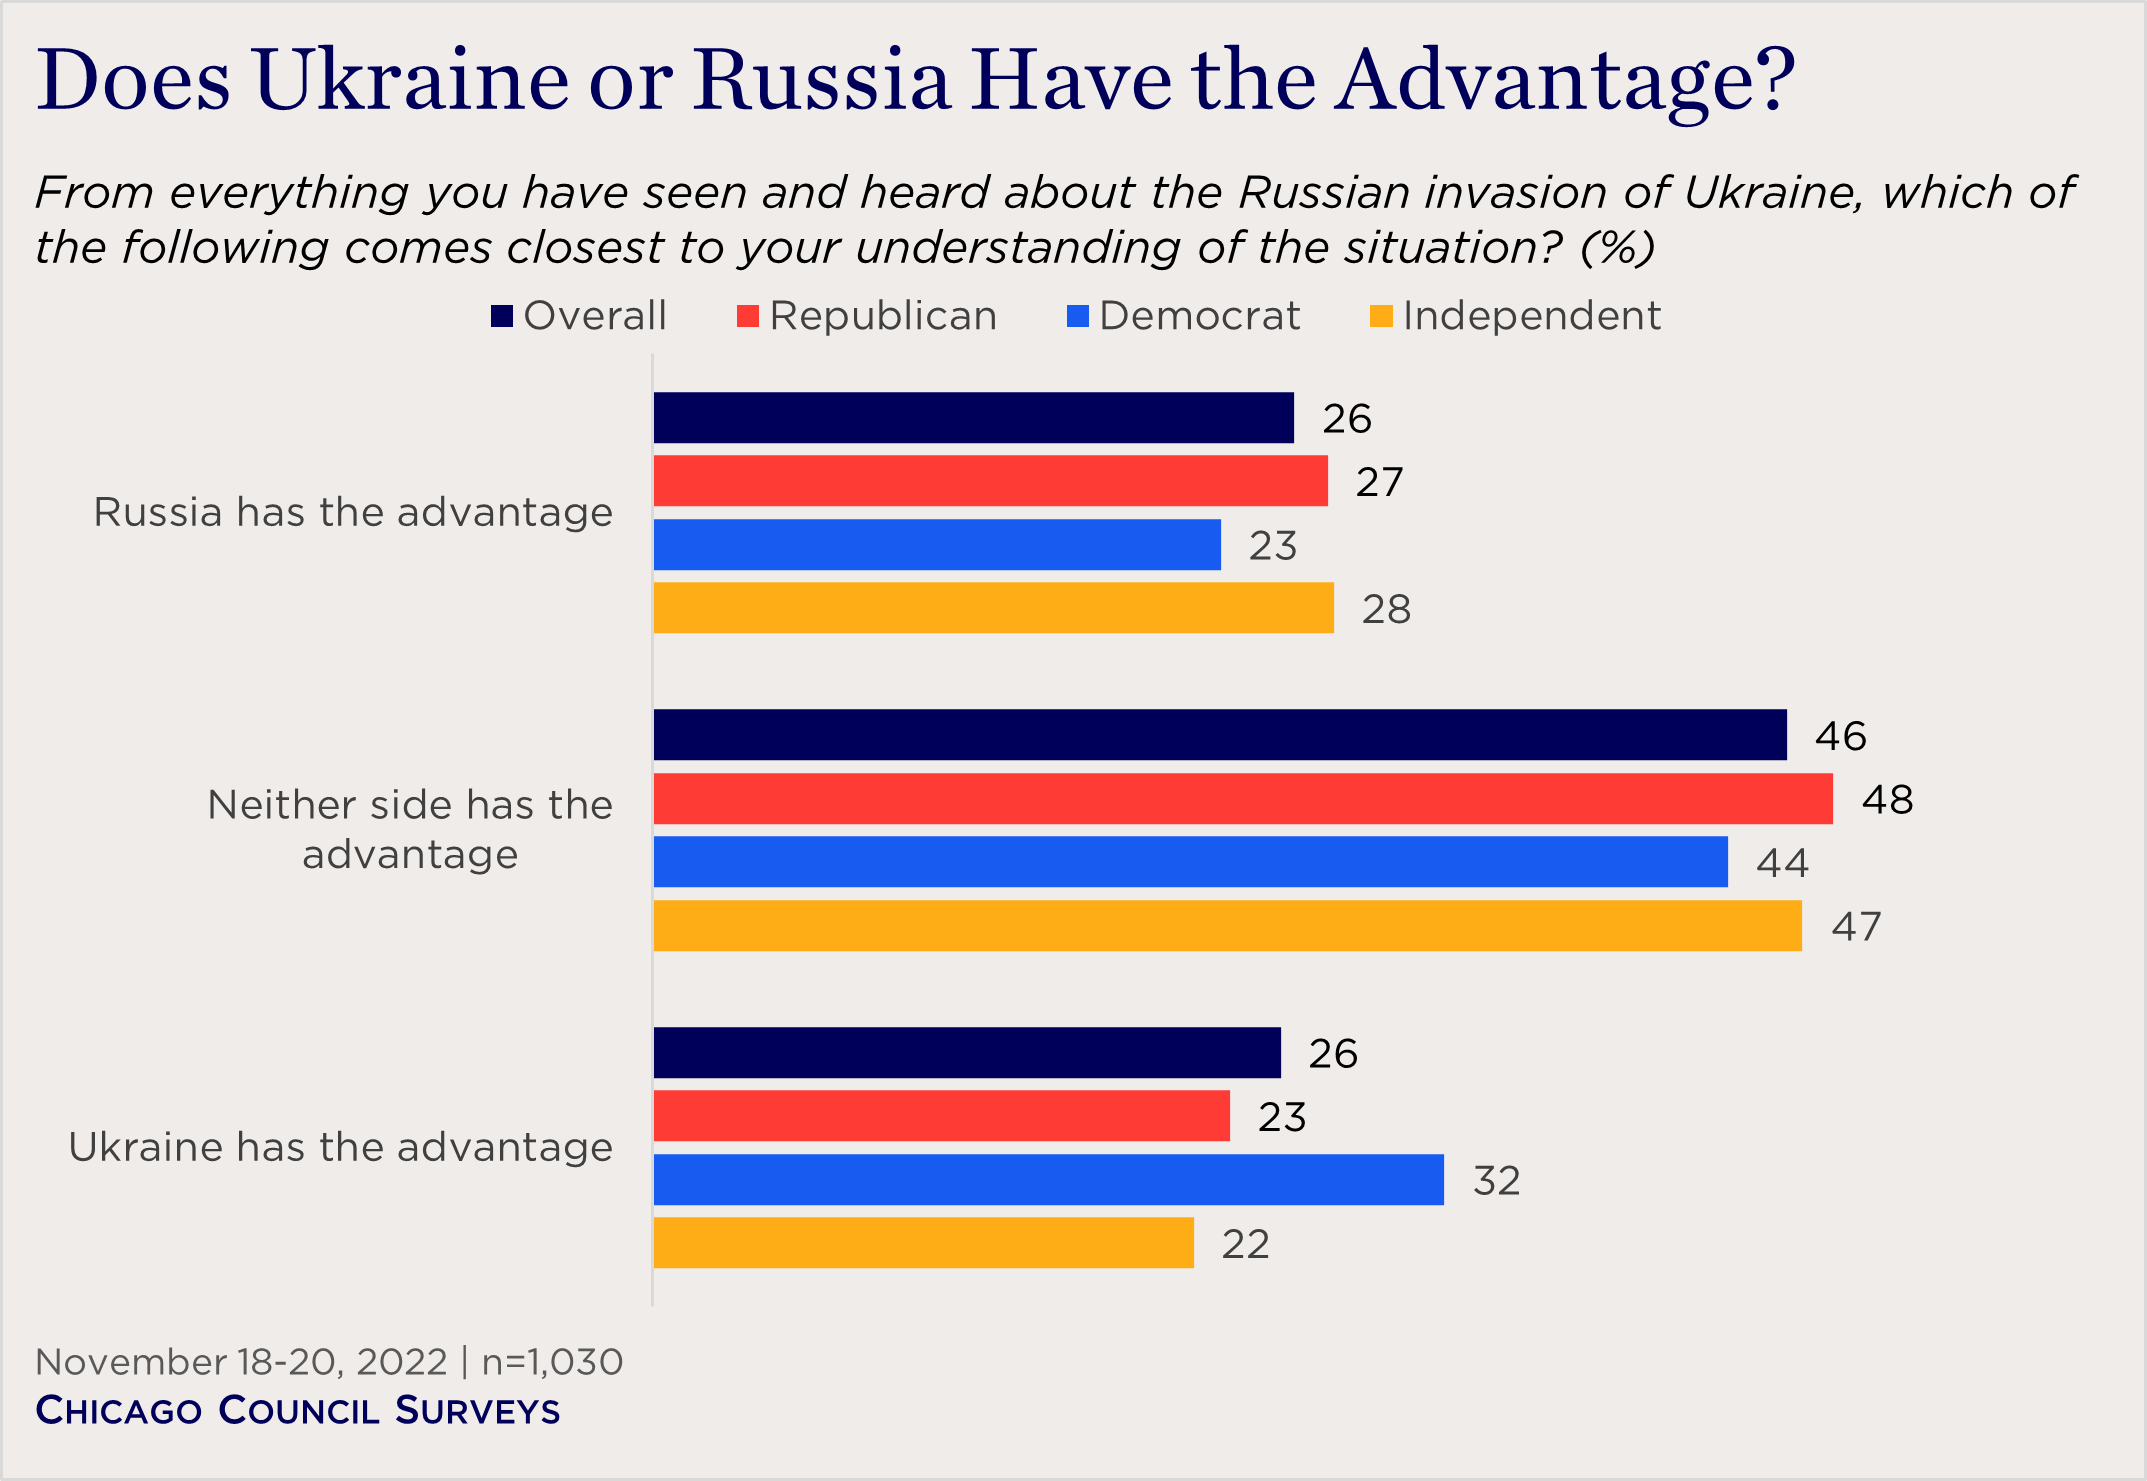 "bar chart showing partisan views on whether Russia or Ukraine has the advantage"